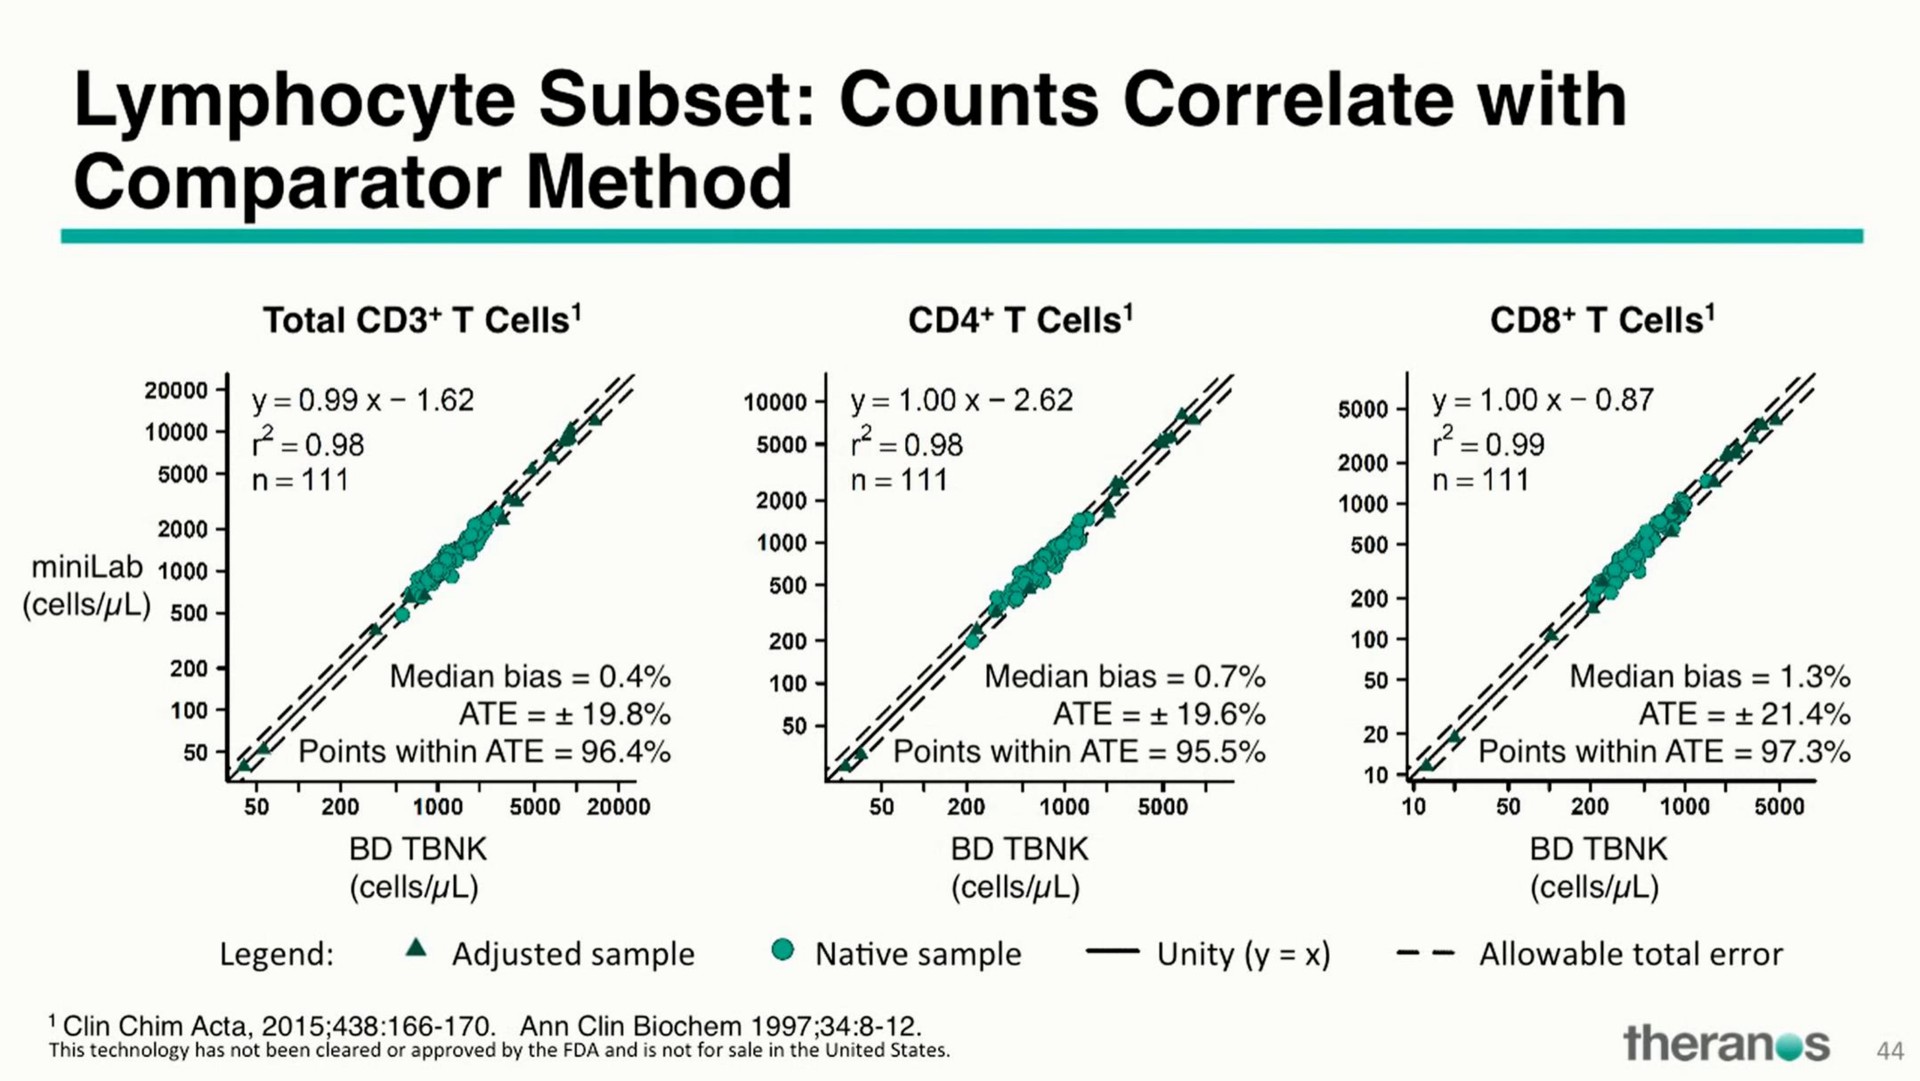 lymphocyte subset counts correlate with comparator method | Theranos